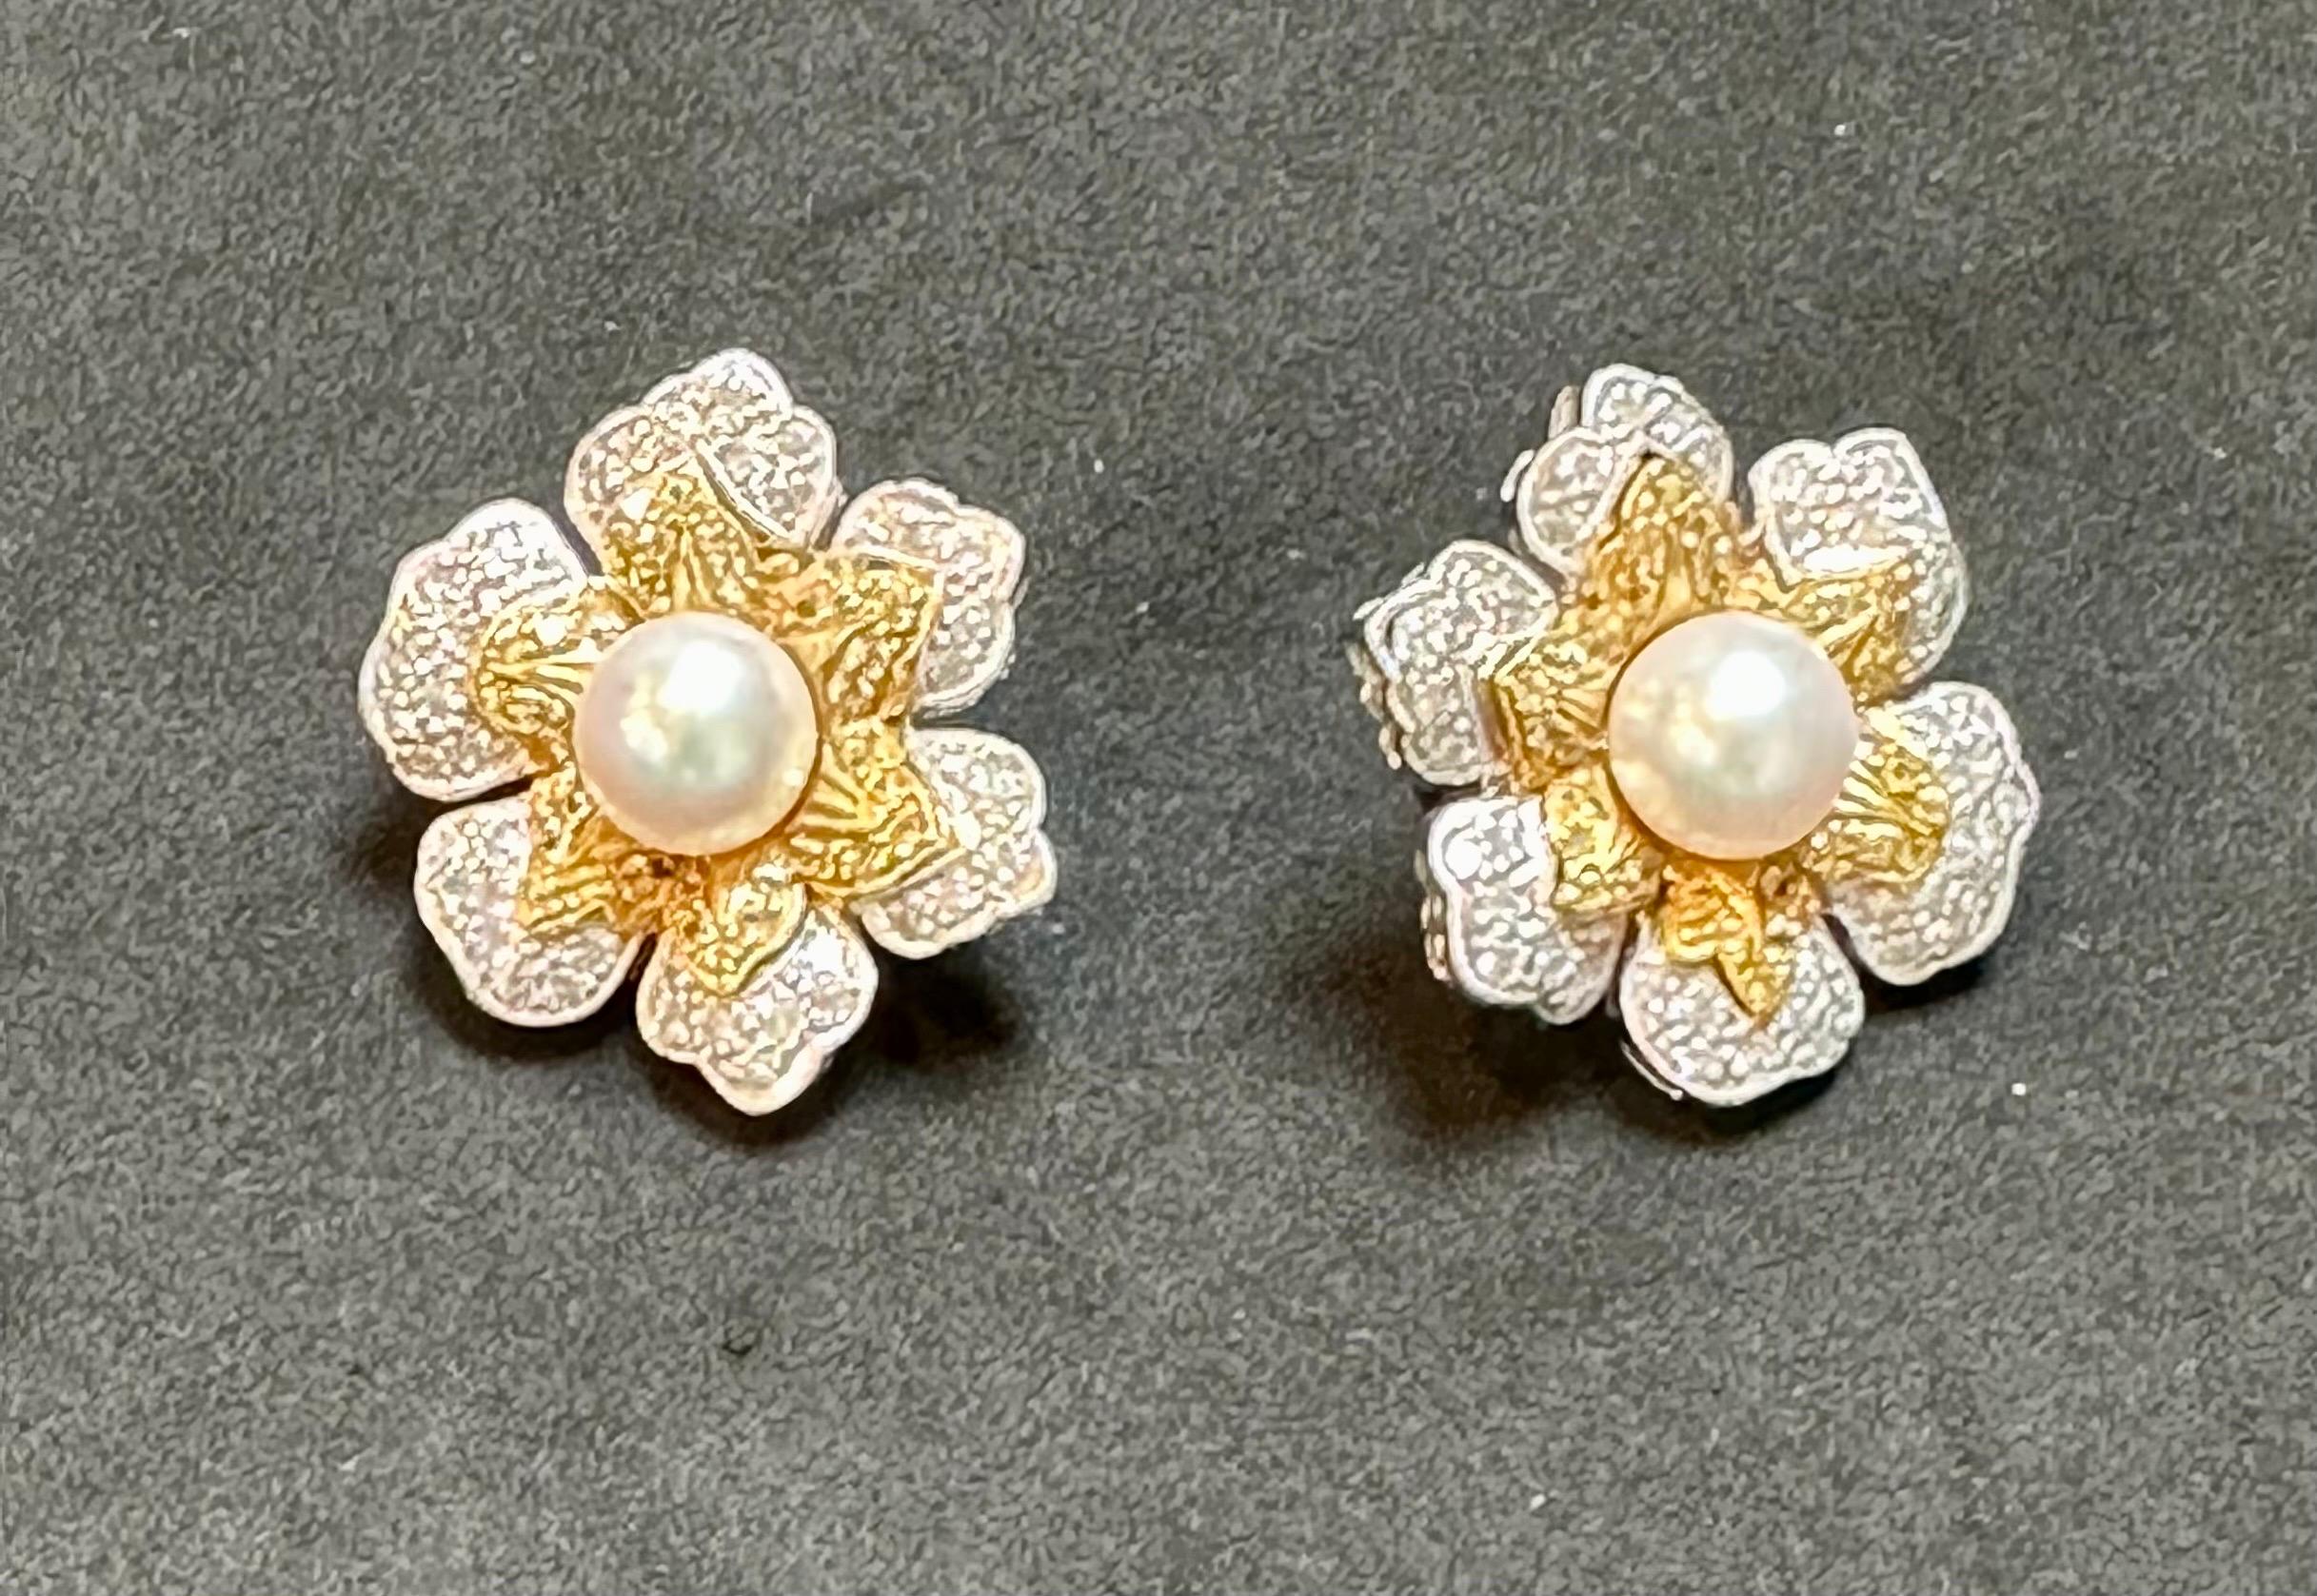 Vintage Diamond South Sea Pearl Platinum Large Flower Clip on Earrings, Two tone
Beautiful estate piece
The Earrings are composed of 2 finest 9  mm south sea pearl  with no blemishes on it ,  pearls of an incredibly high luster  
These earrings are